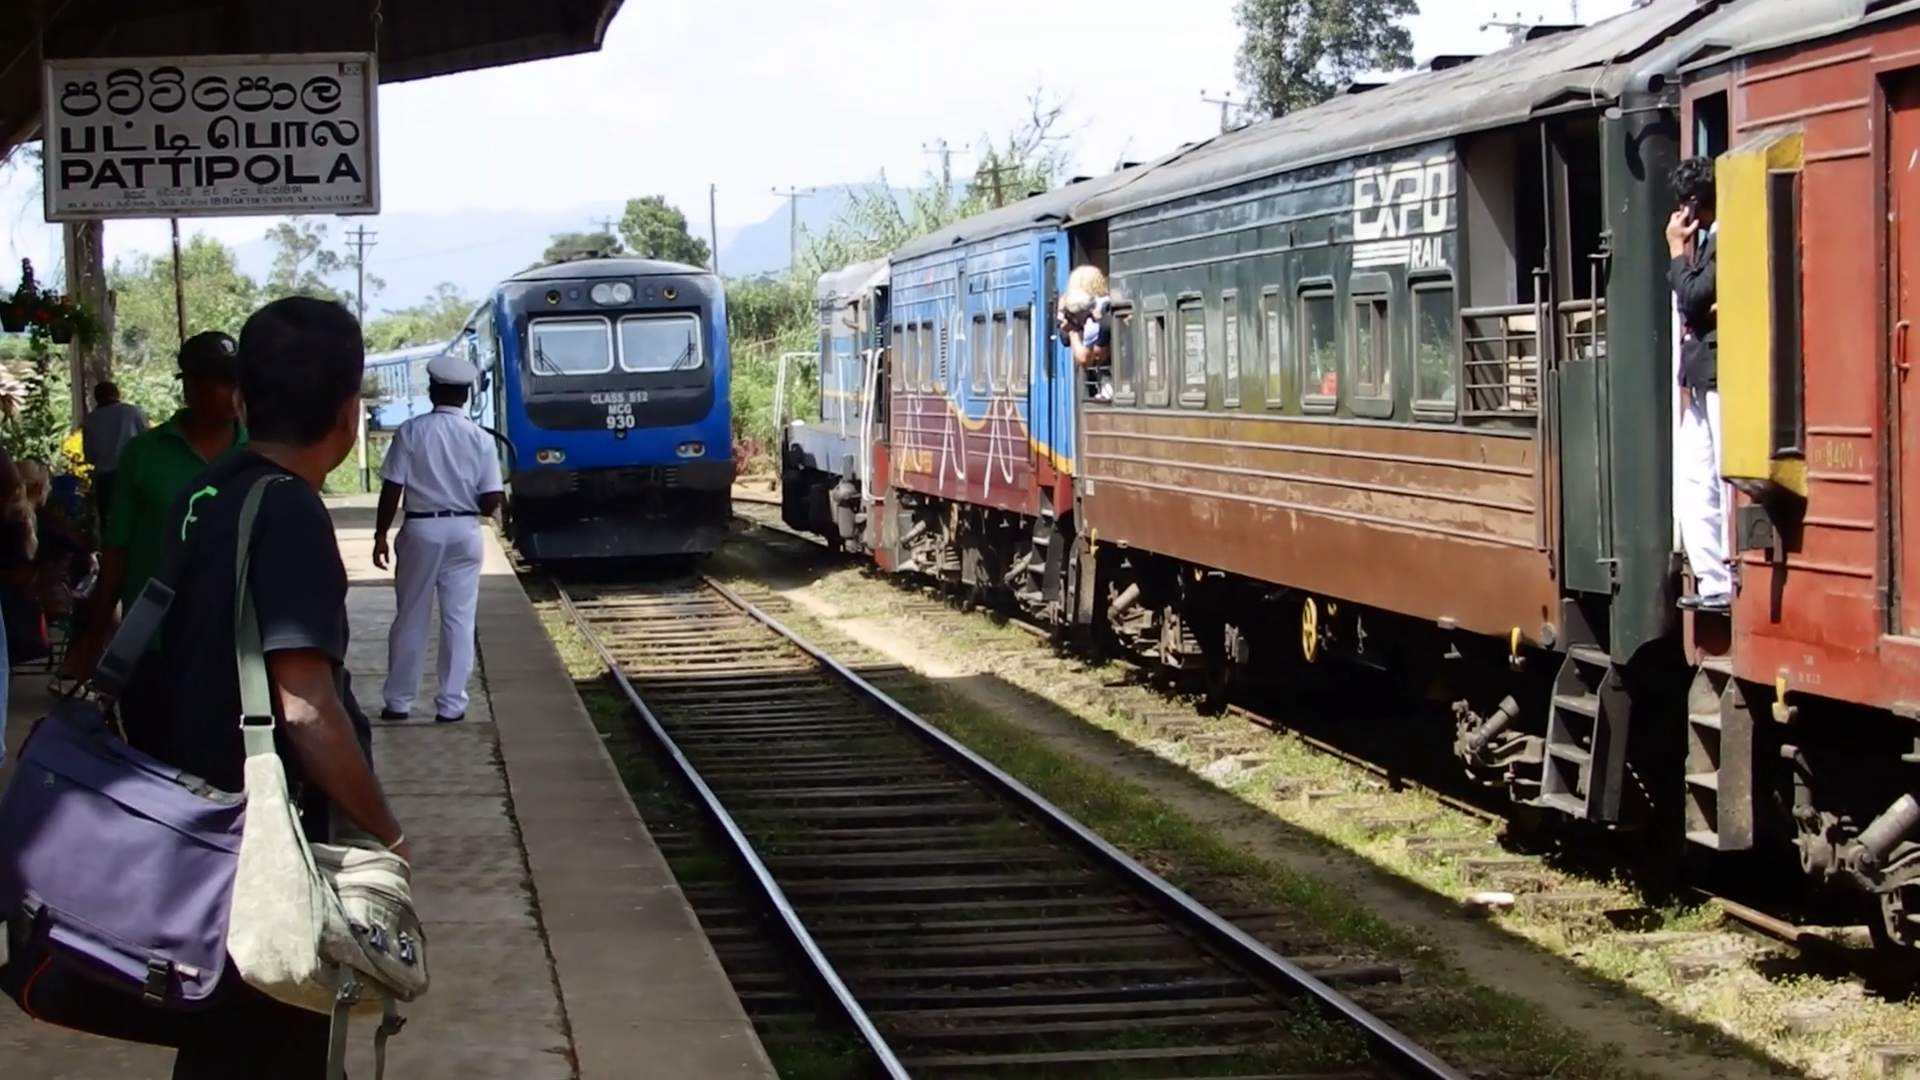 Arrival of the train at the station Pattipola, Sri Lanka Stock Video ...